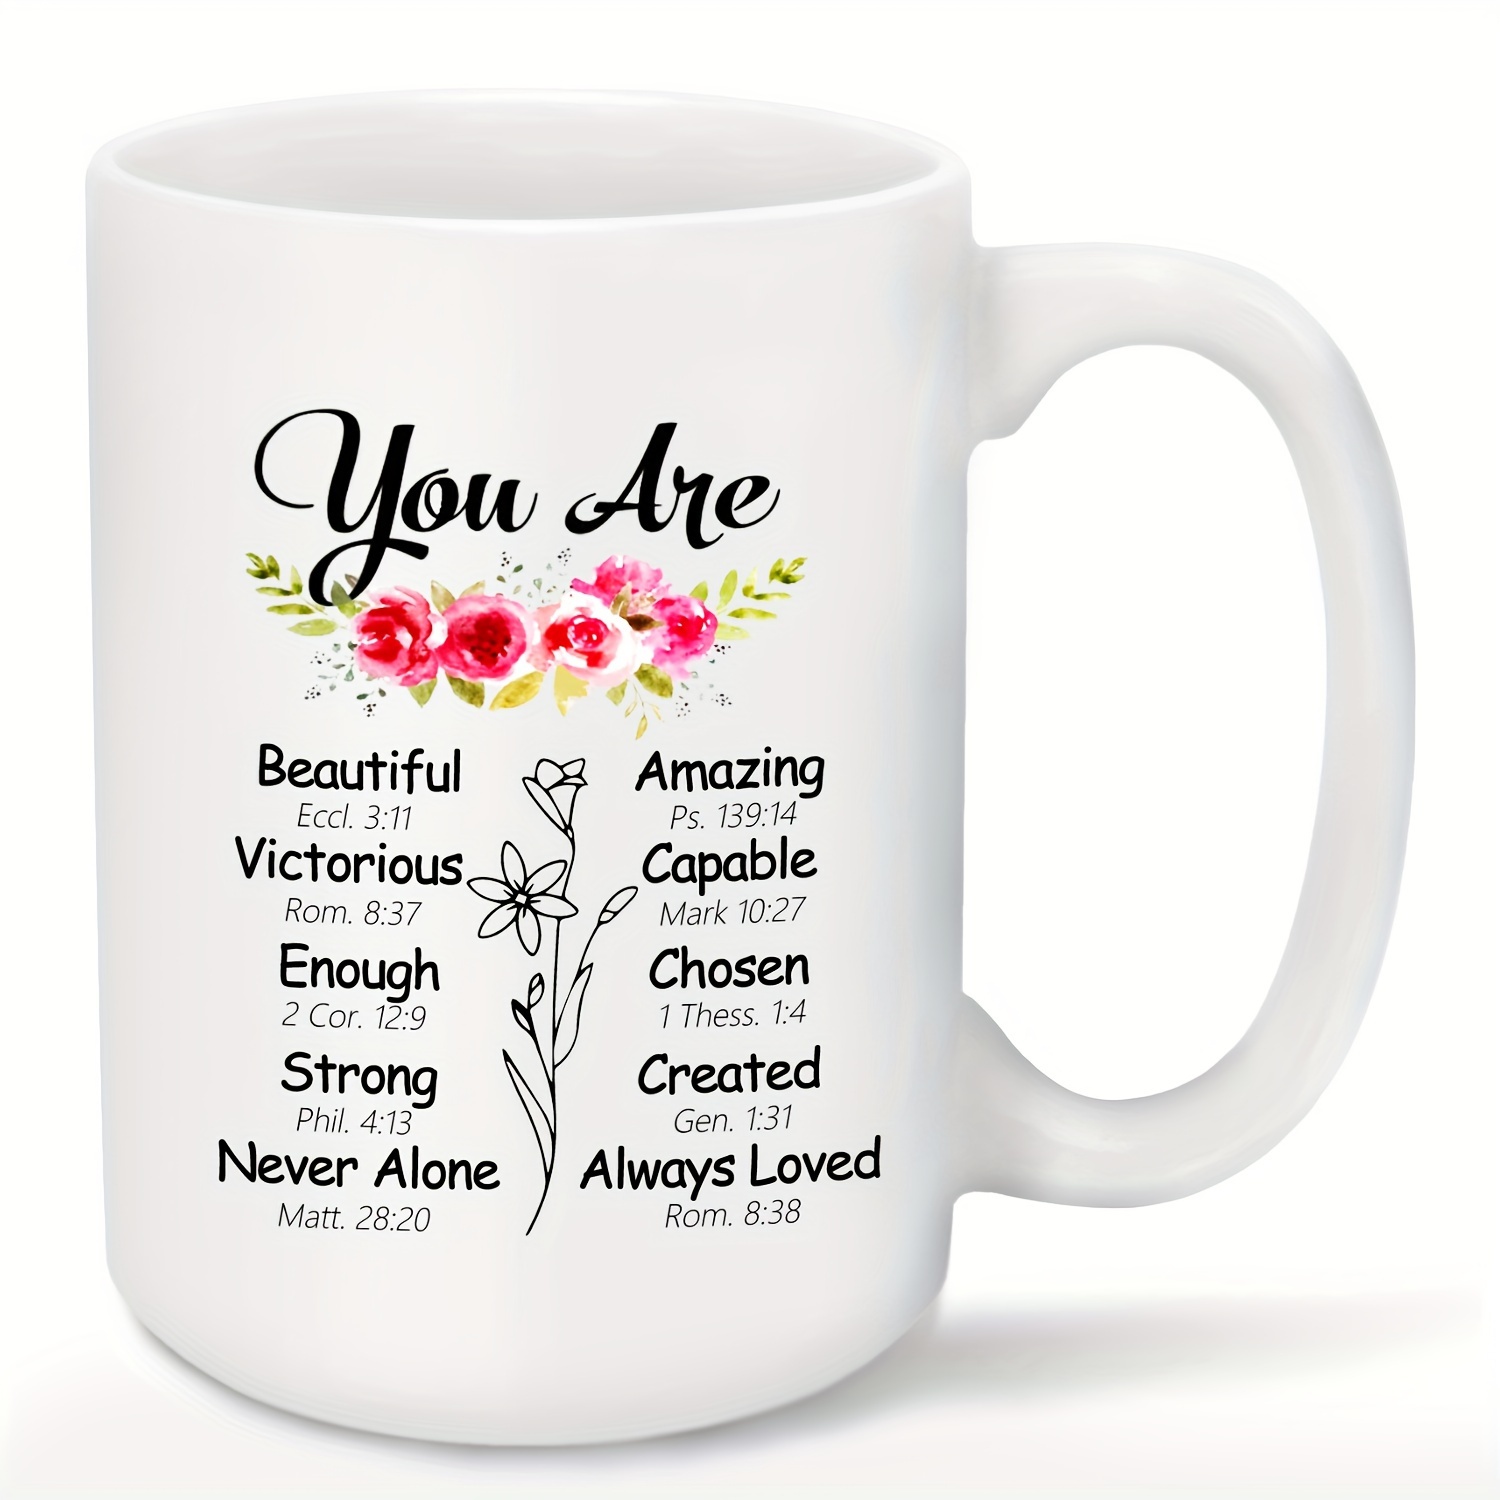 Self Care Gifts Positivity Mug Motivational Gift Gifts for Her